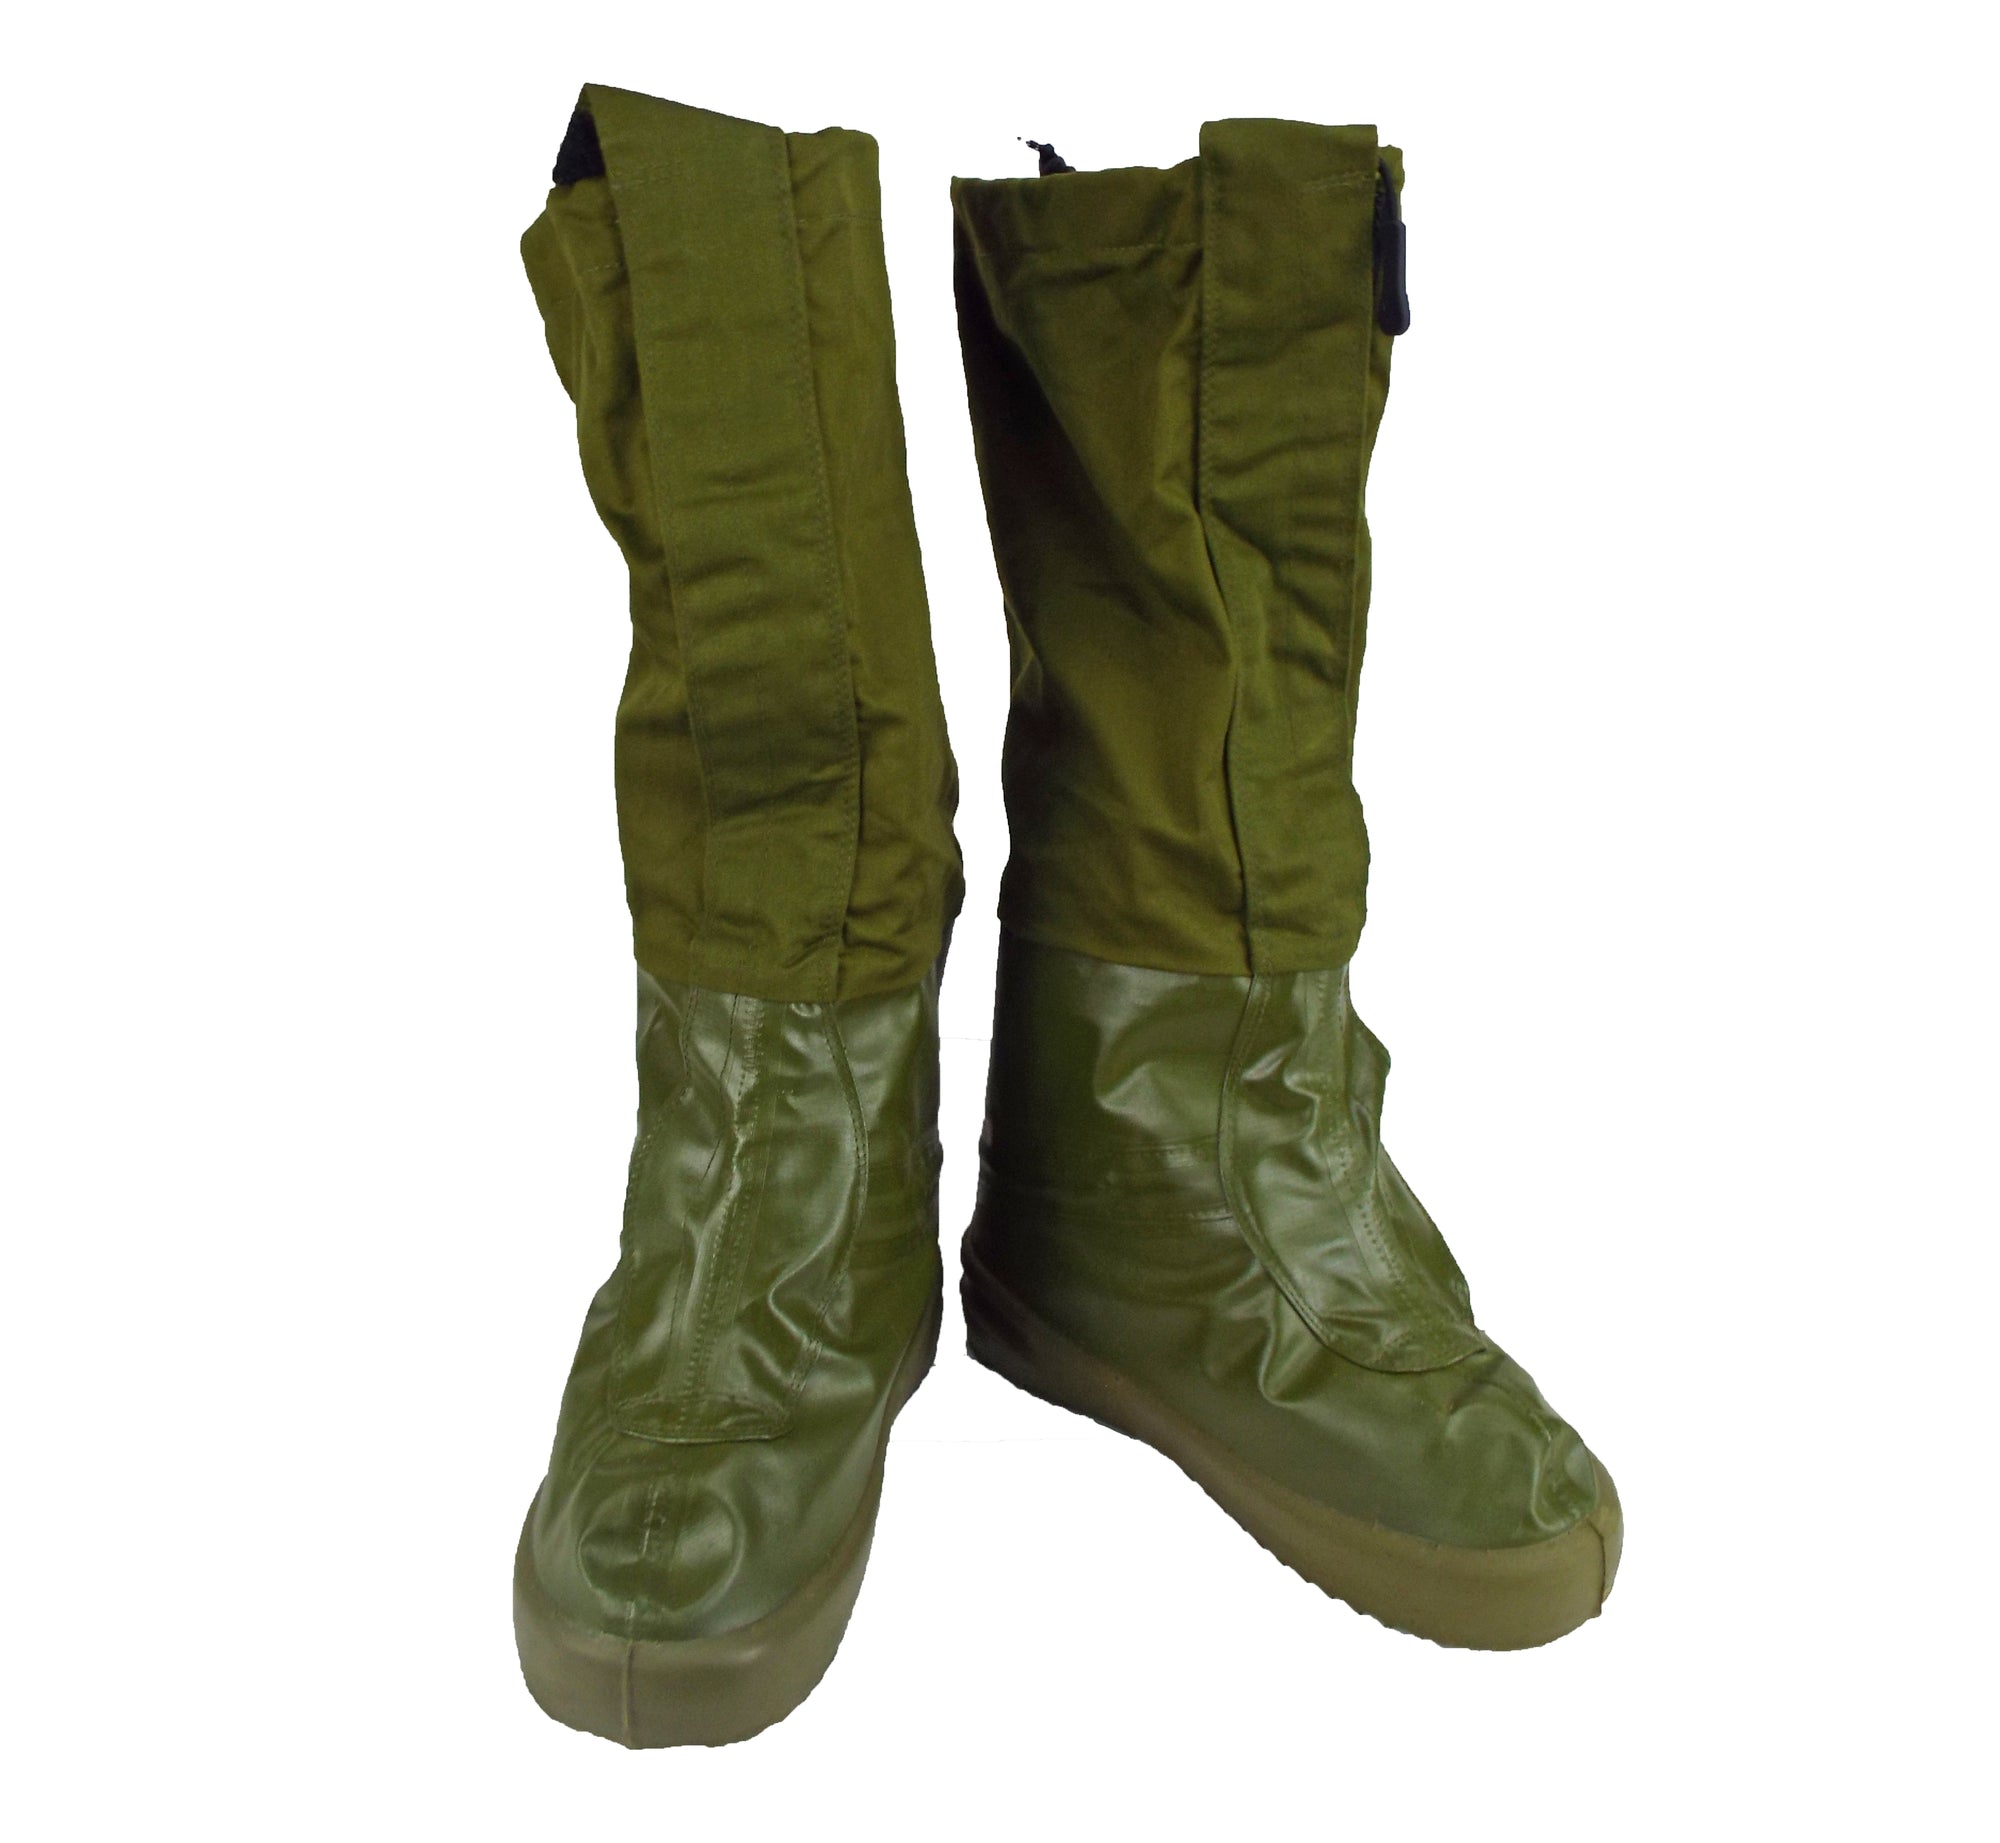 Dutch Army - Green Waterproof Over-Boots - Grade 1